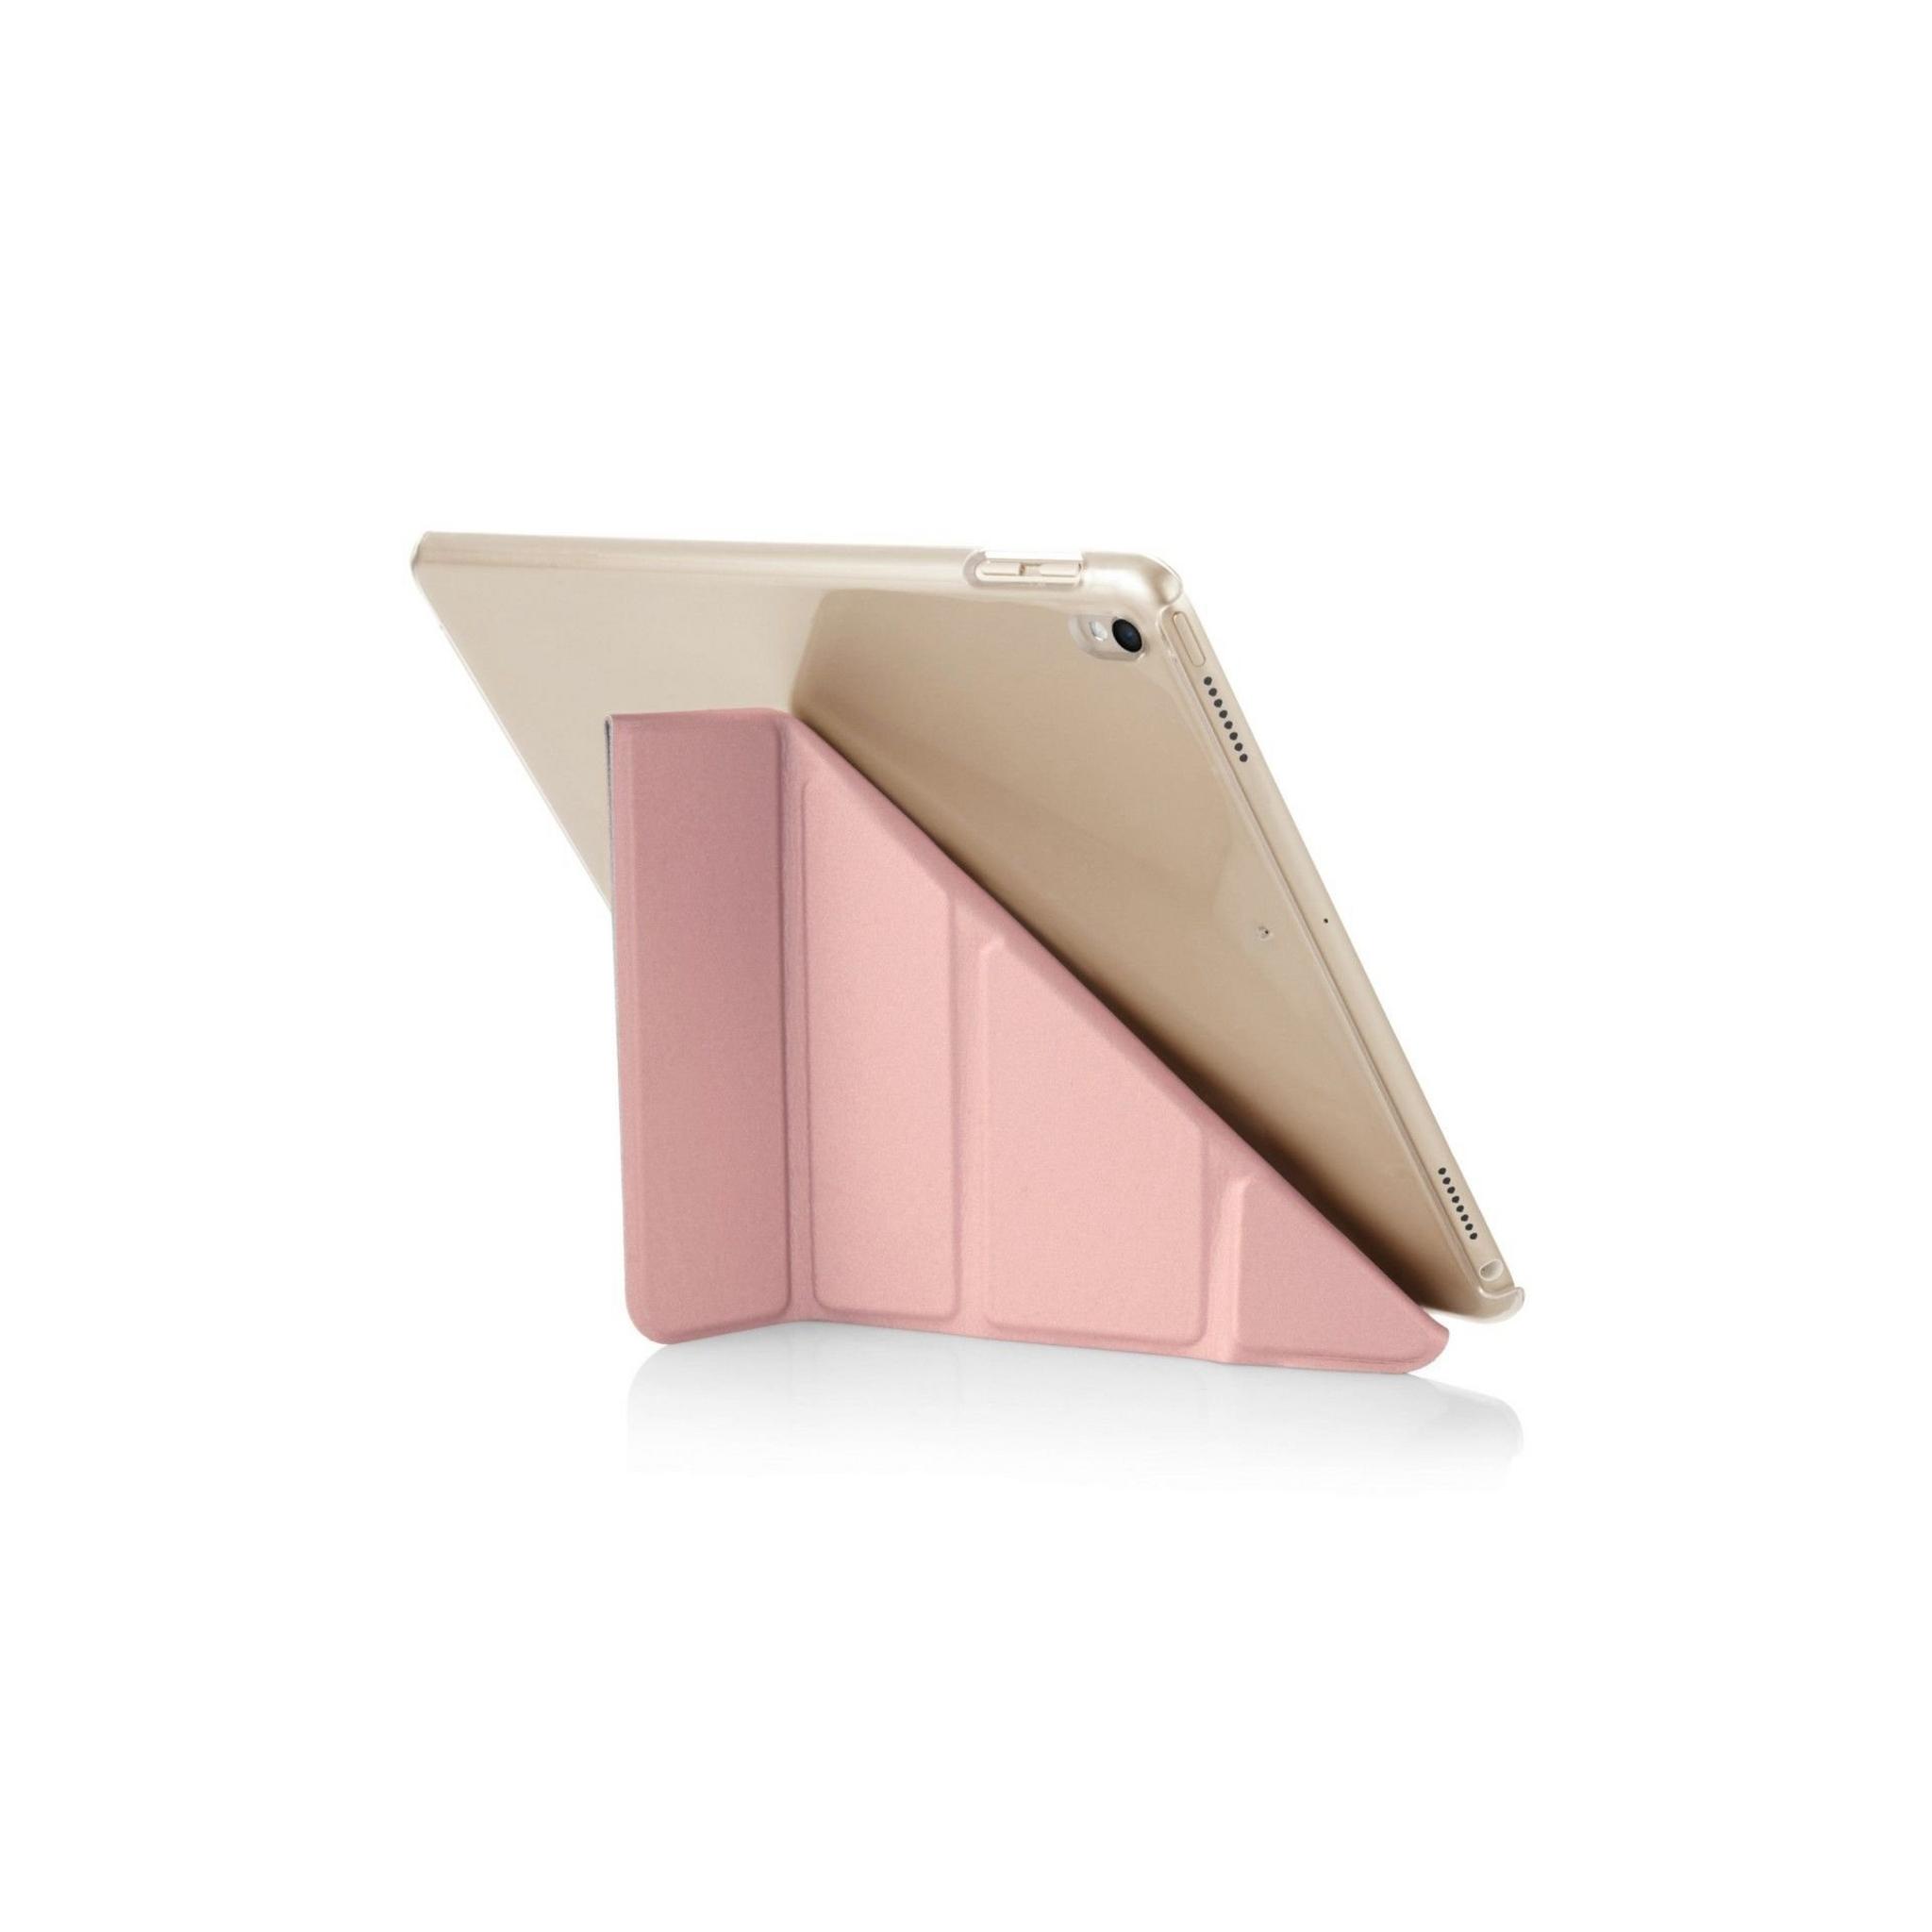 Pipetto Origami Folding Case for Apple iPad 10.2-inch 2019/2020 - Rose Gold